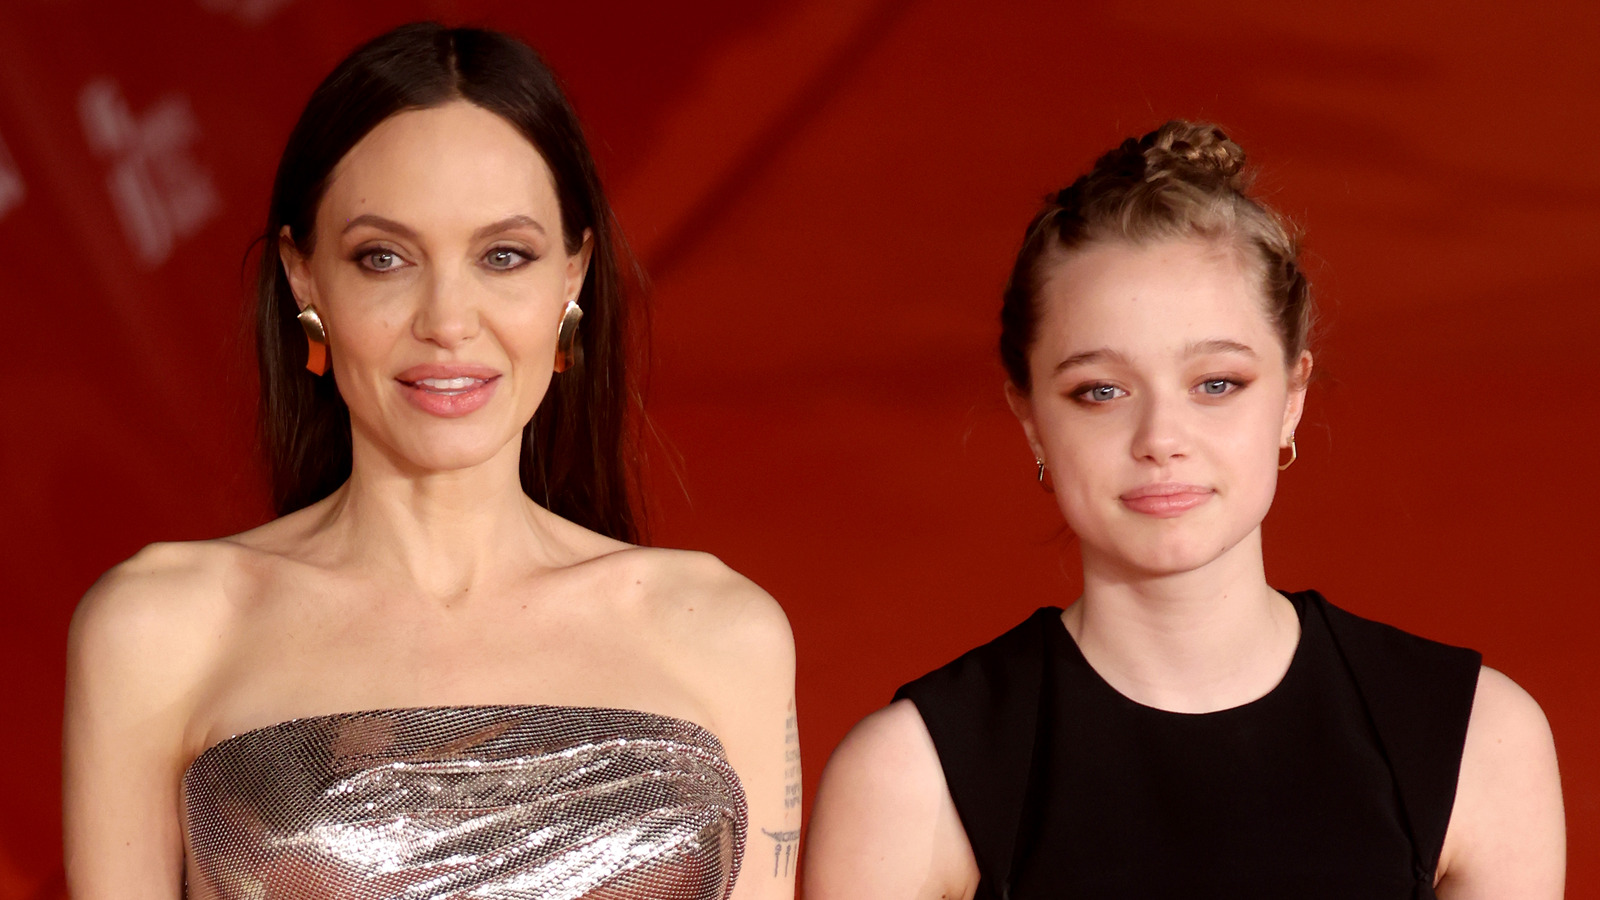 the iconic look shiloh jolie pitt clearly inherited from angelina